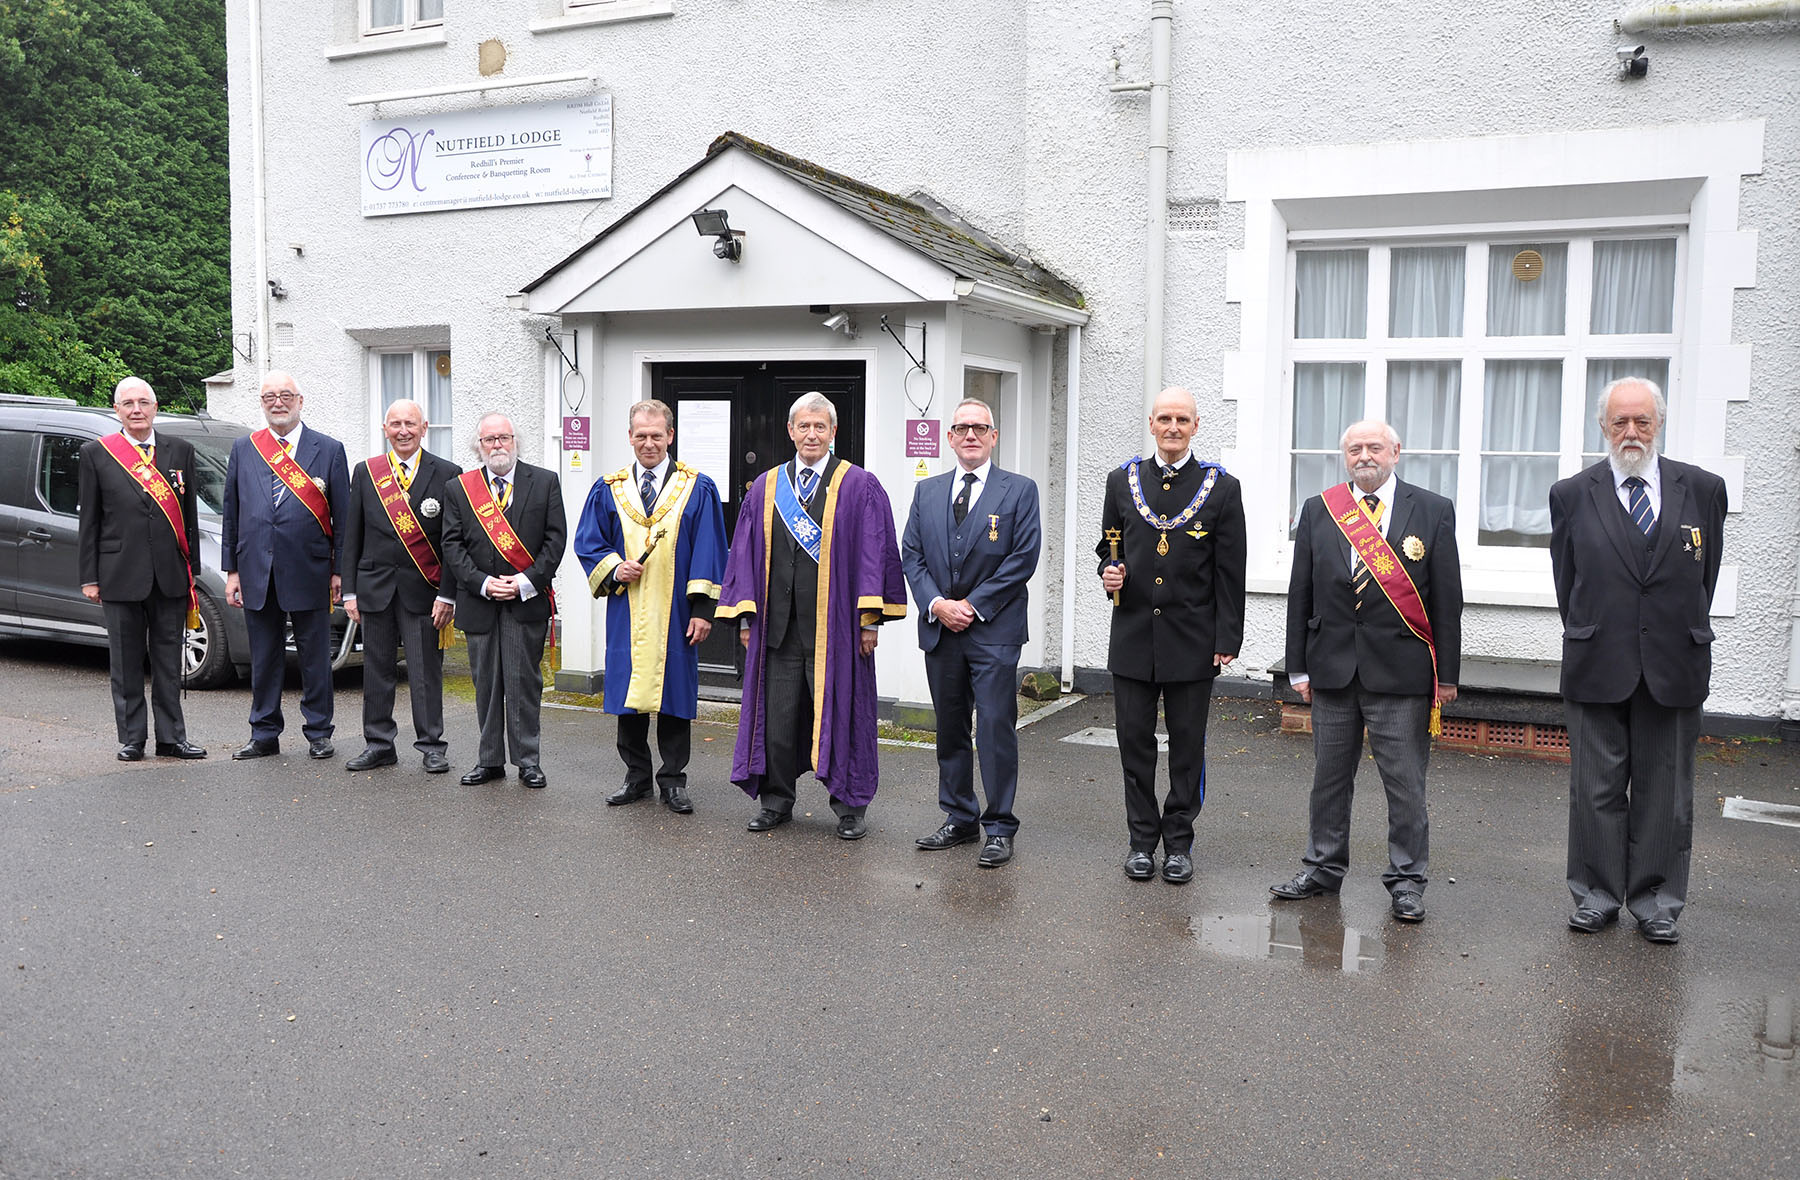 A Special Day for Warlingham Conclave